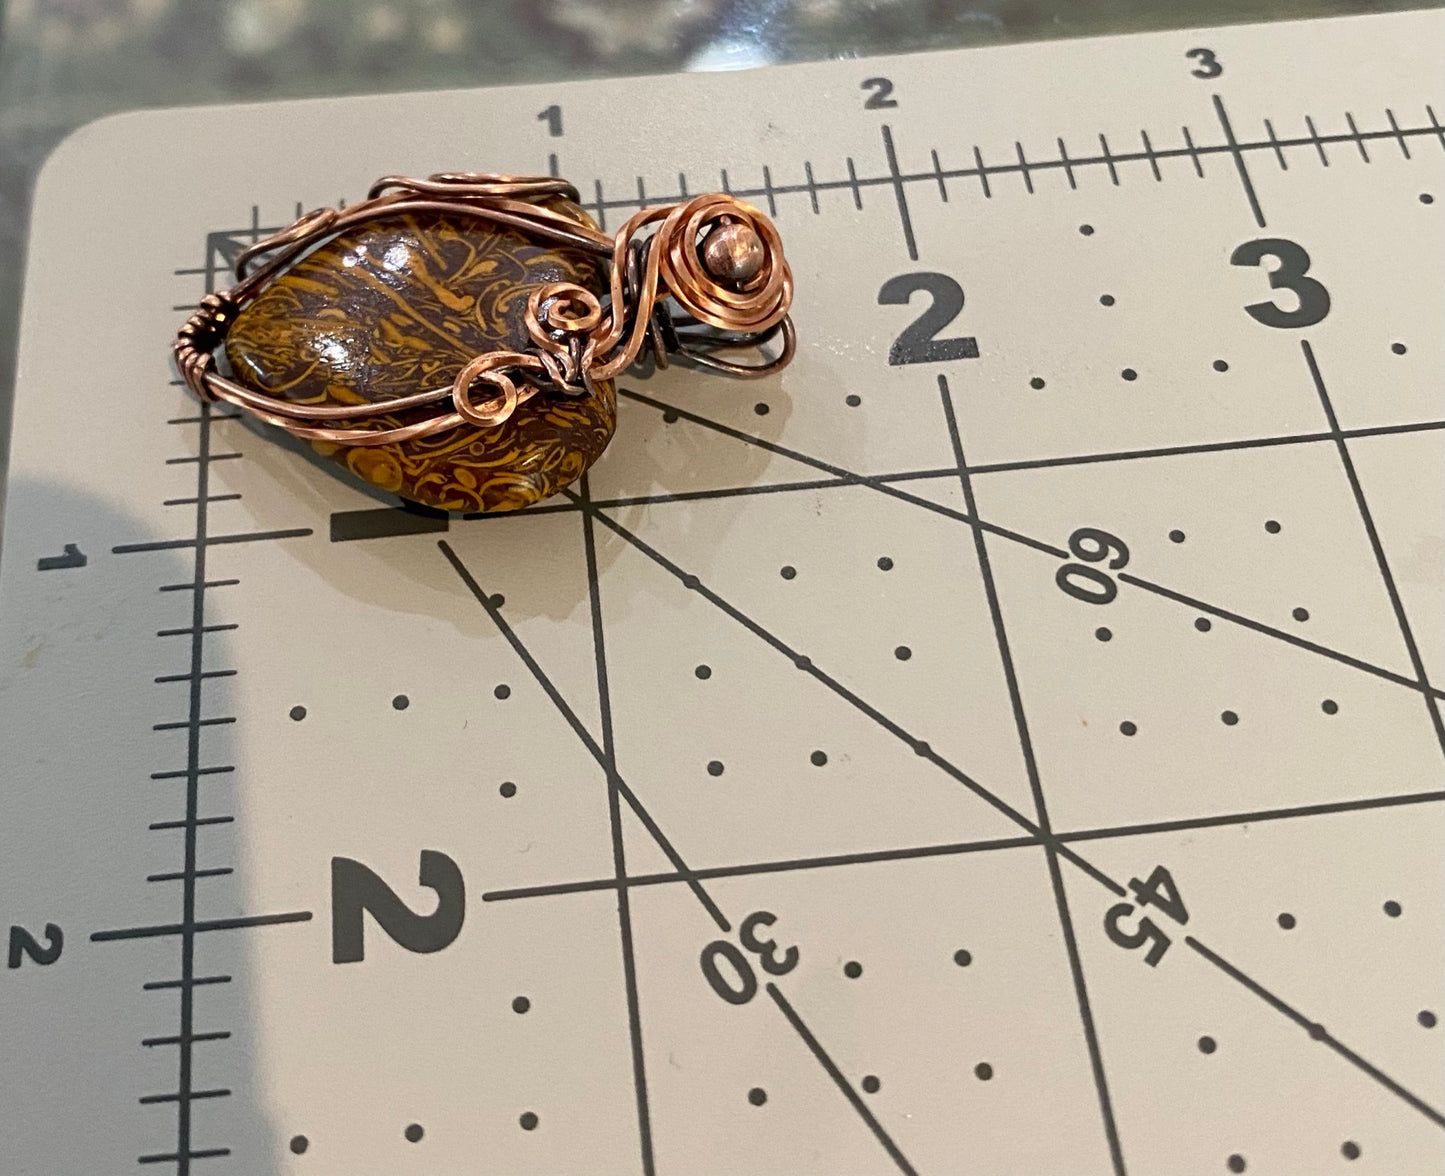 Natural Mariam Jasper Heart-Shaped Pendant Wire Wrapped in Copper